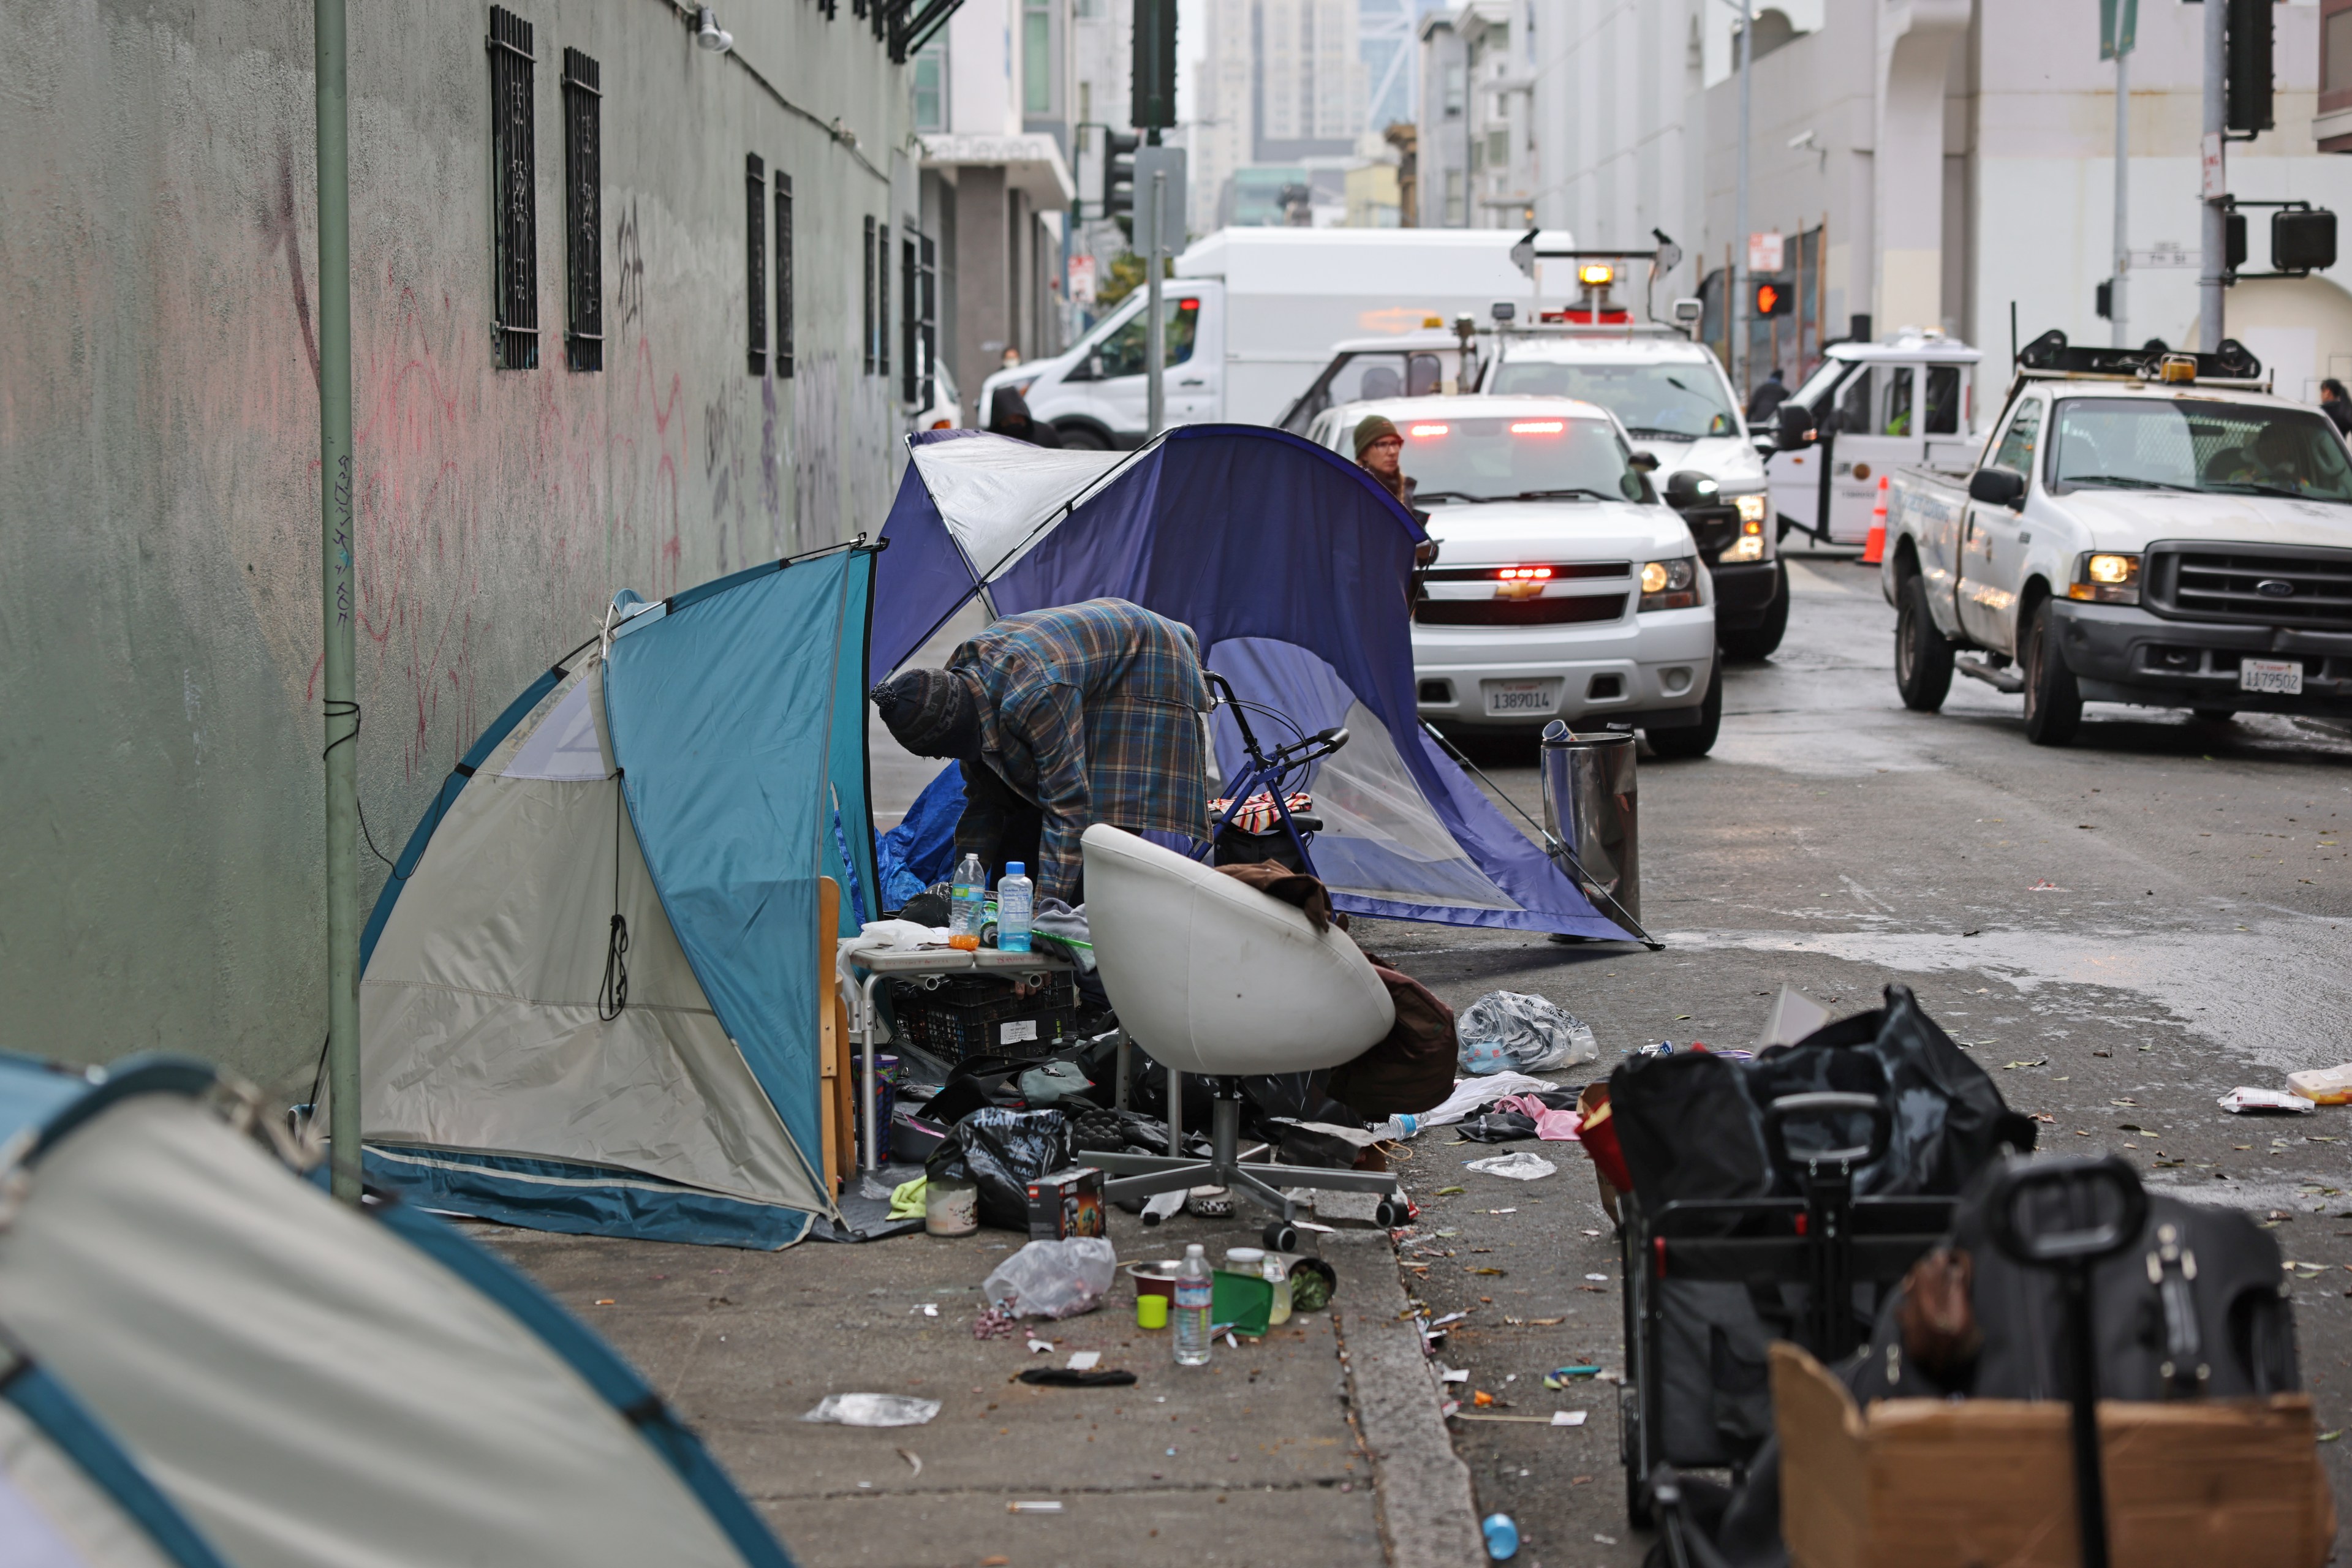 An alley with tents, a person rummaging through belongings, scattered trash, and cars in line.